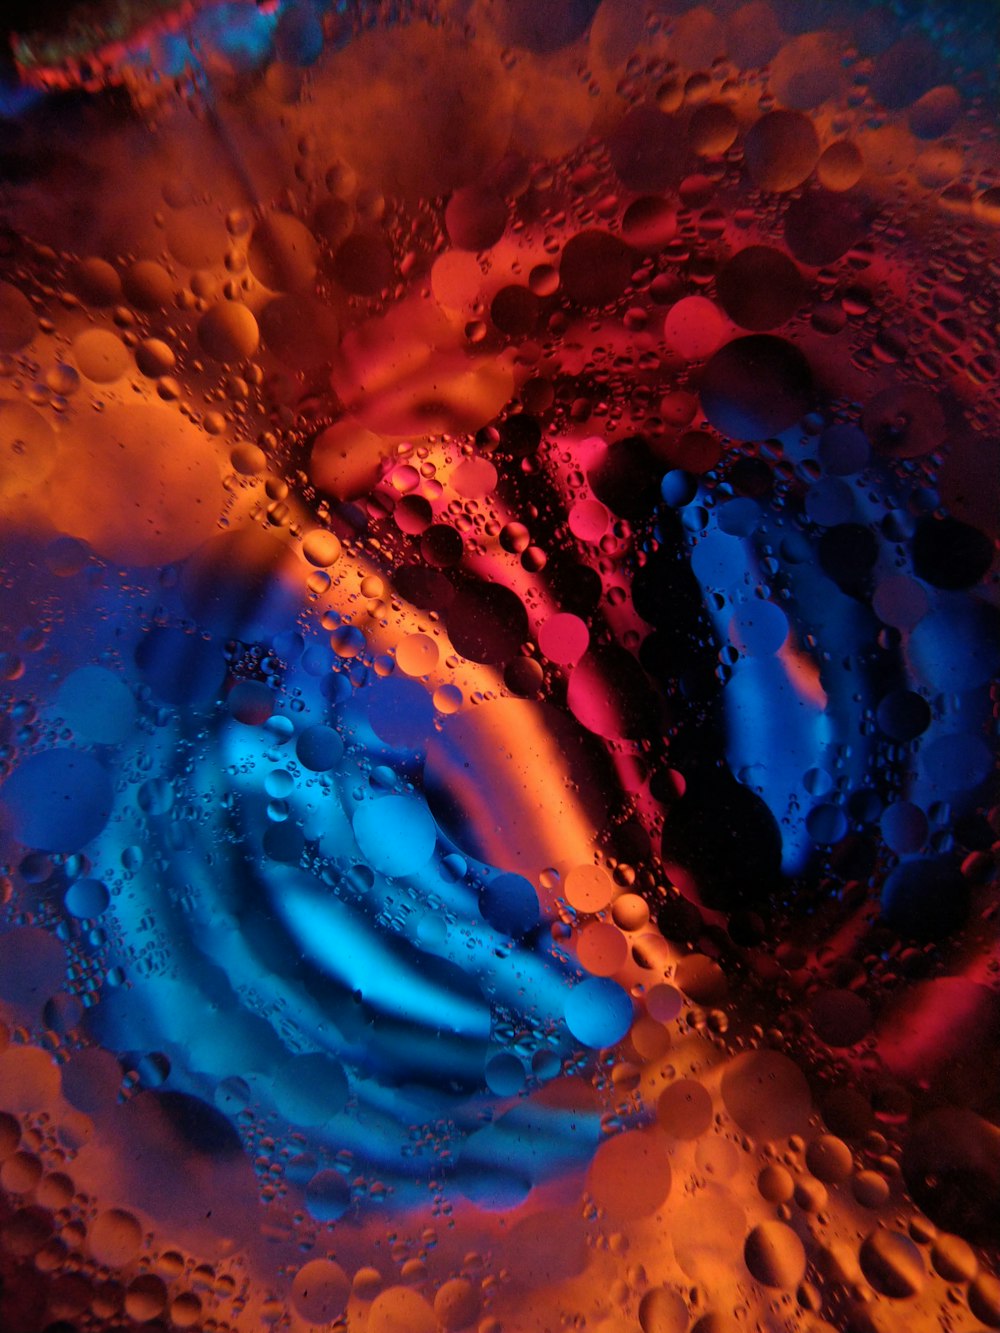 a close up of a liquid filled with blue and red colors